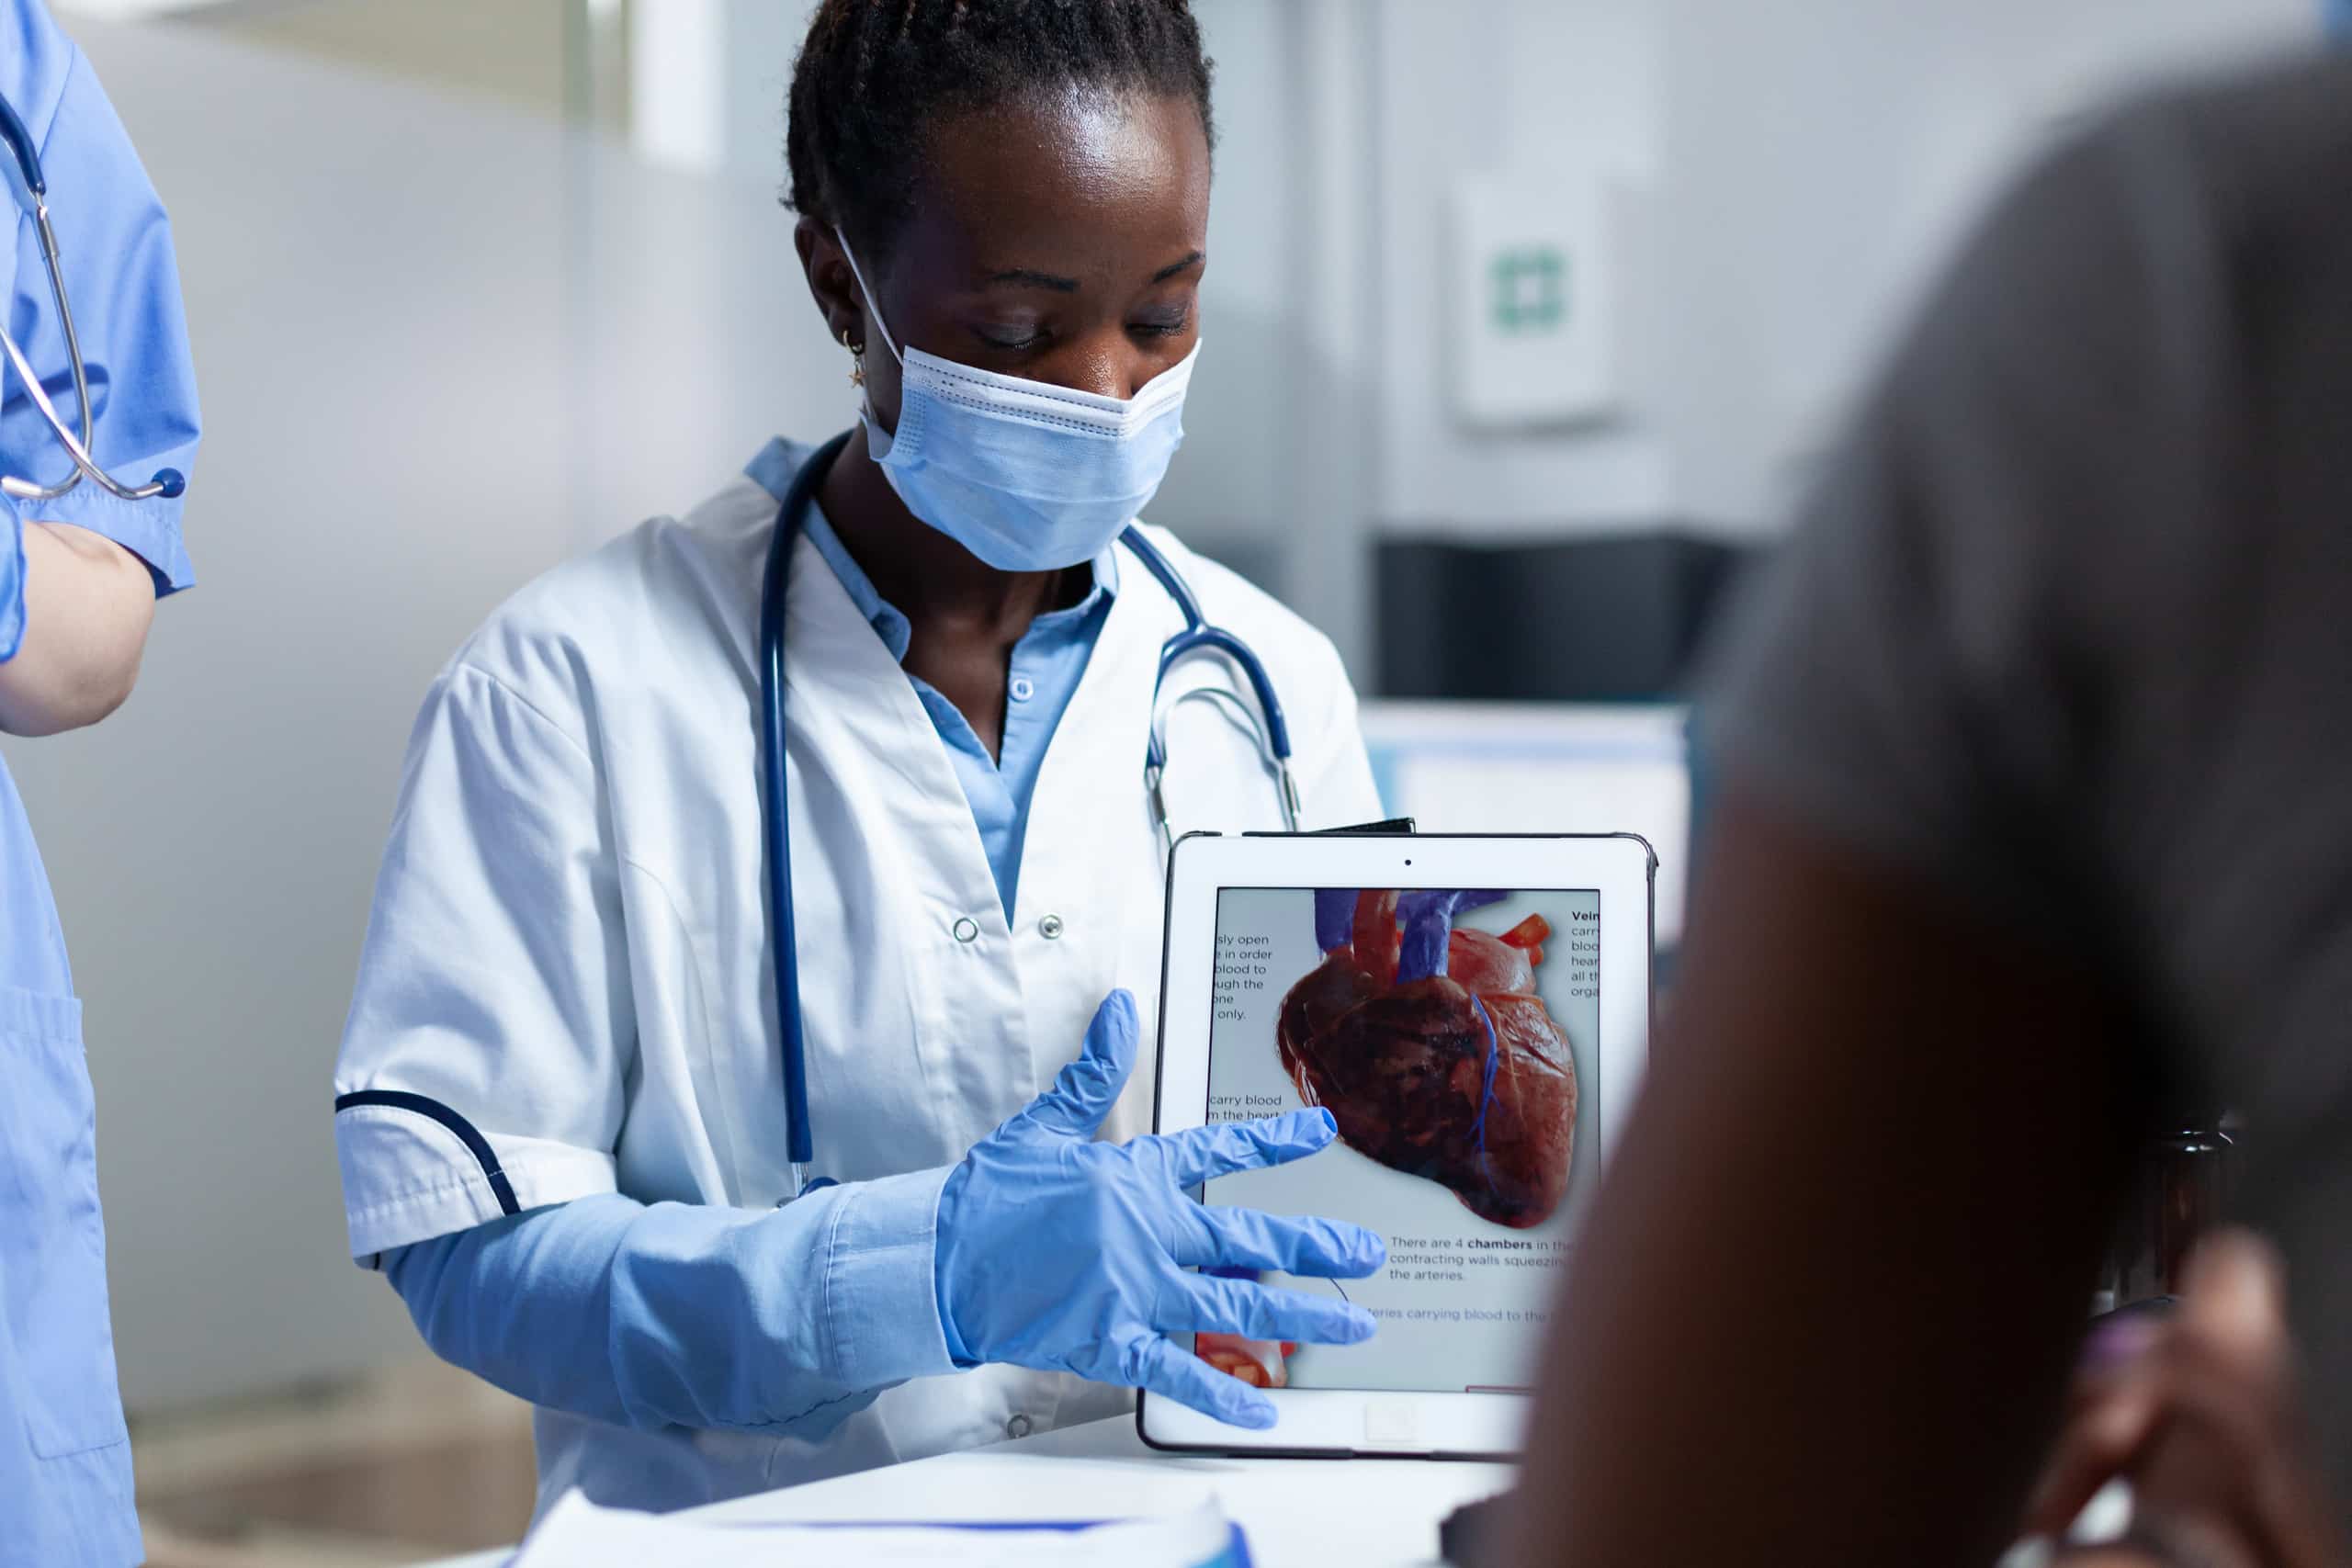 A nurse is analyzing a patient's x-ray for signs of heart disease and assessing the risk level.